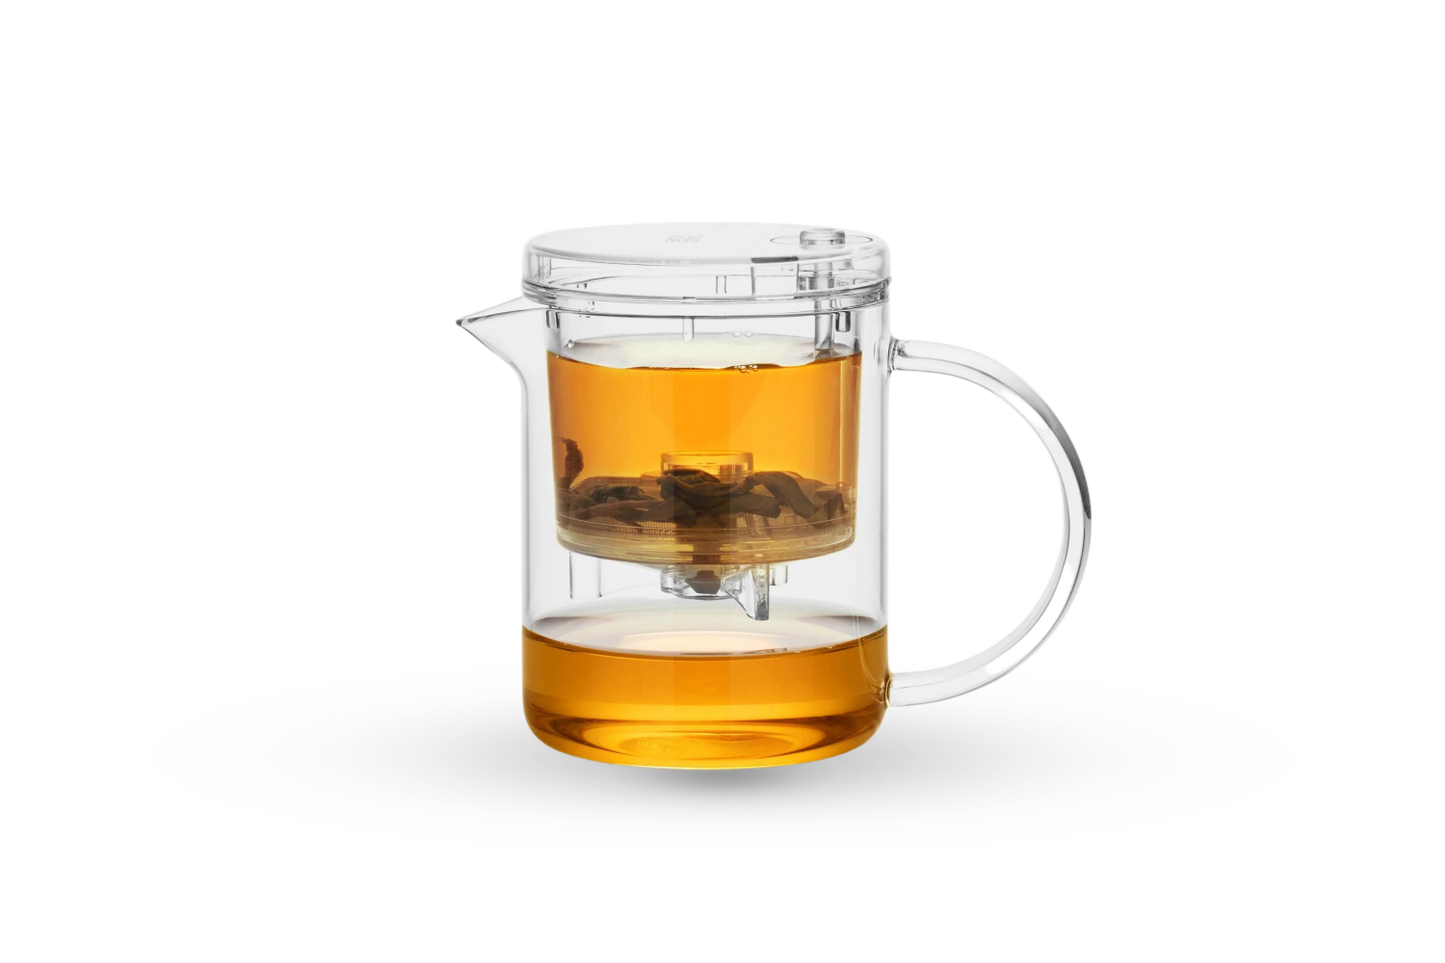 
                  
                    Small Teapot with Filter for Loose Tea - Starter
                  
                